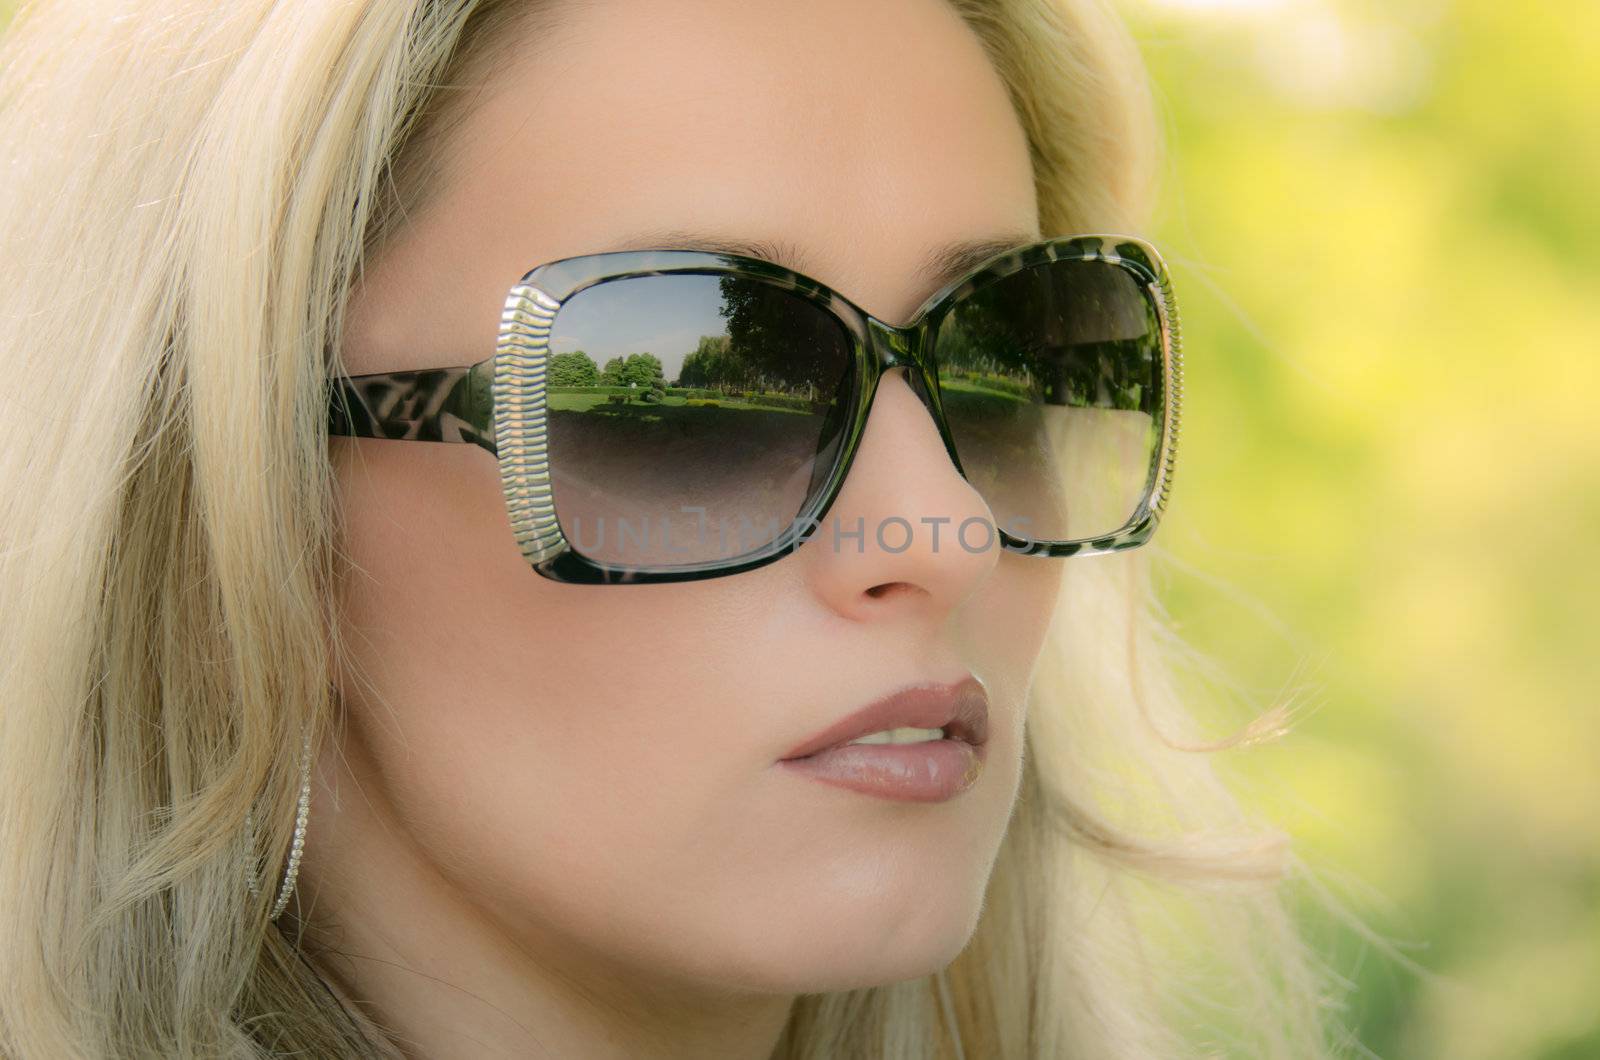 Portrait of a blond woman in sunglasses